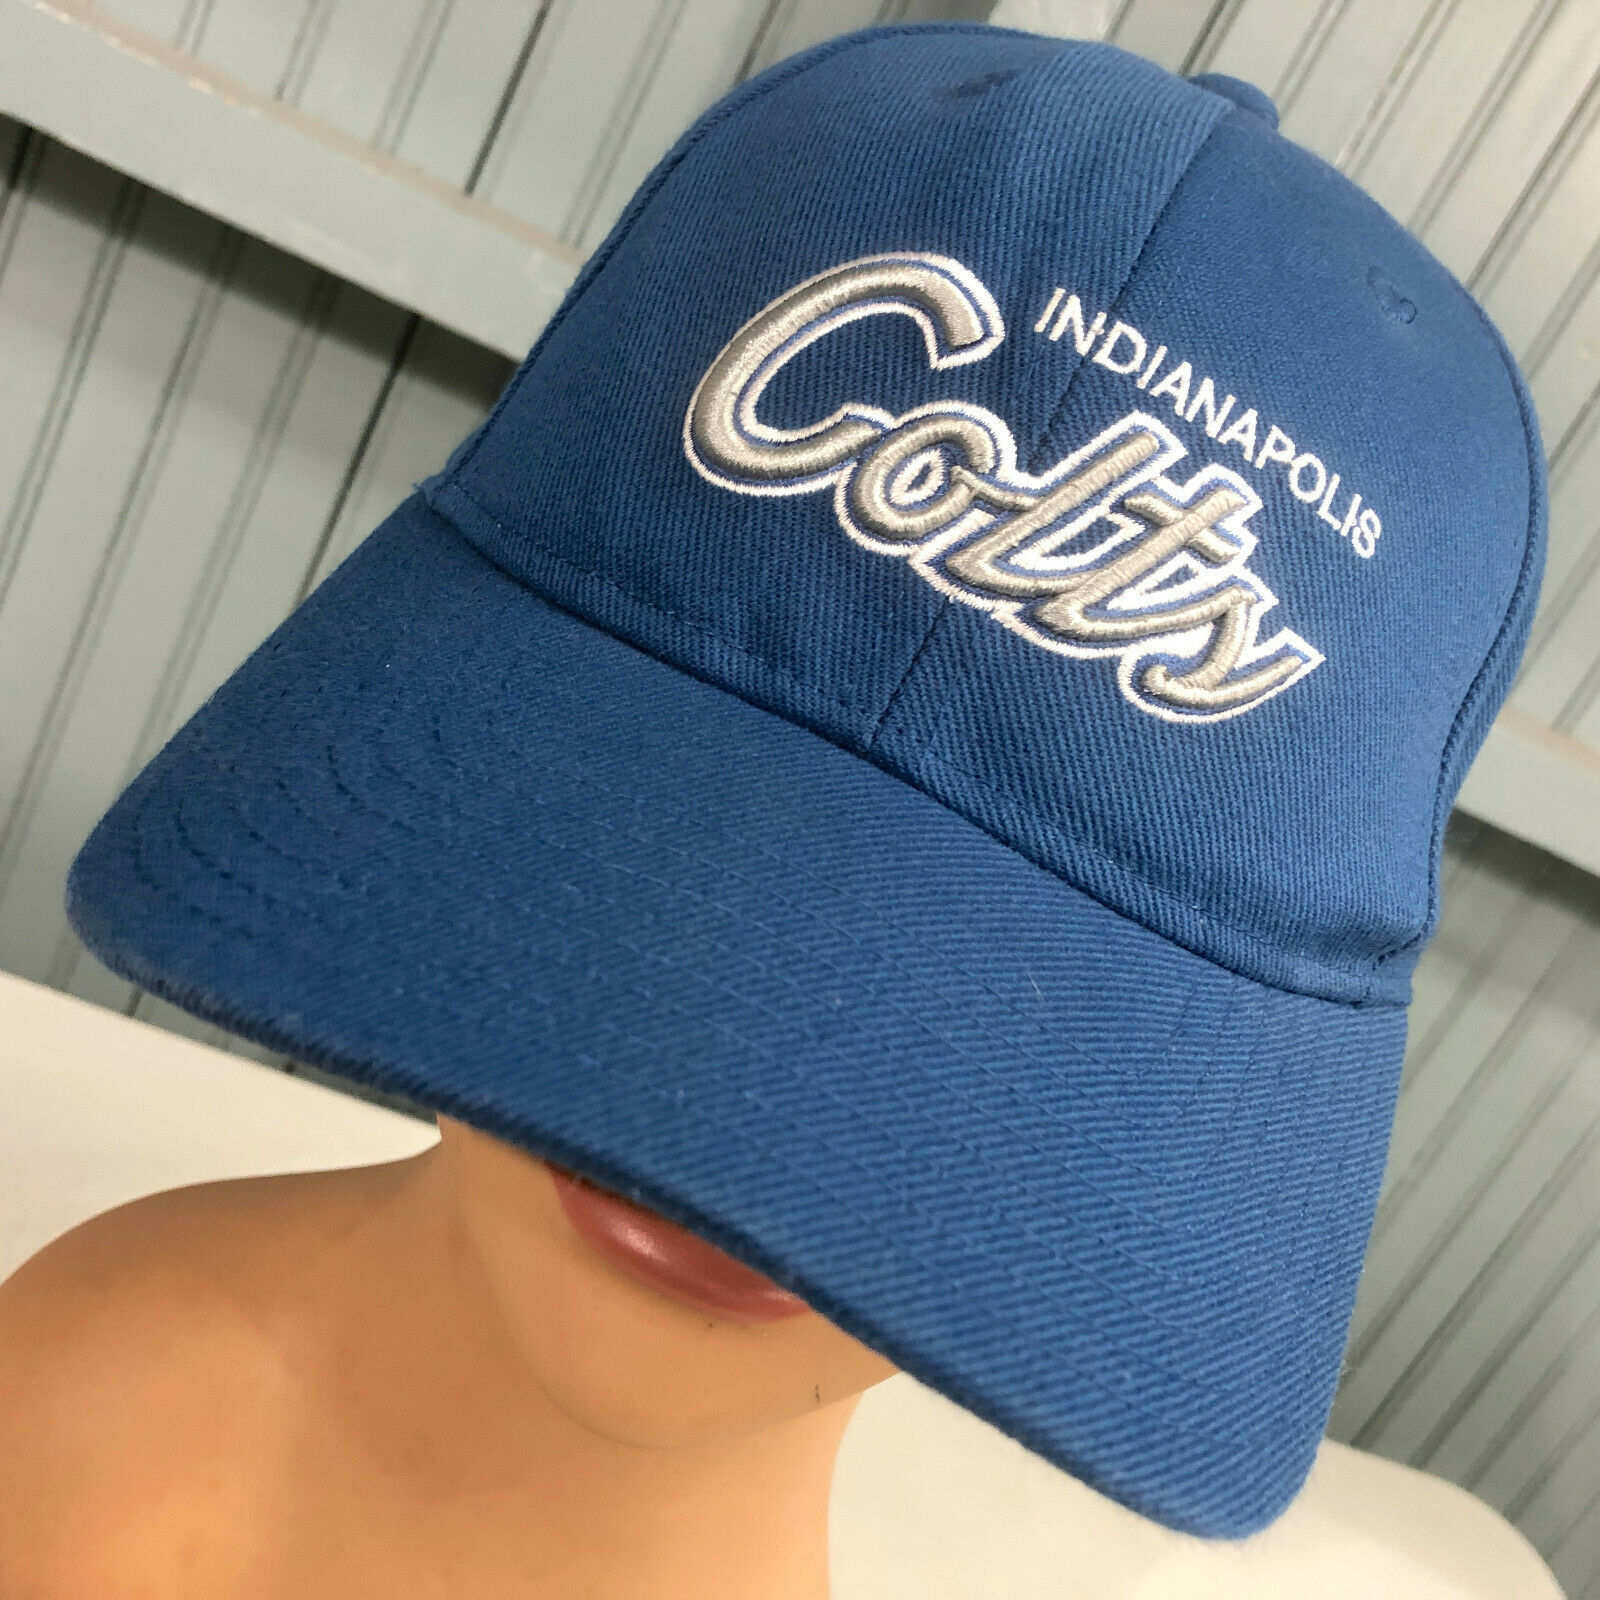 Primary image for Indianapolis Colts Reebok NFL Licensed Adjustable Script Adult Ball Cap 